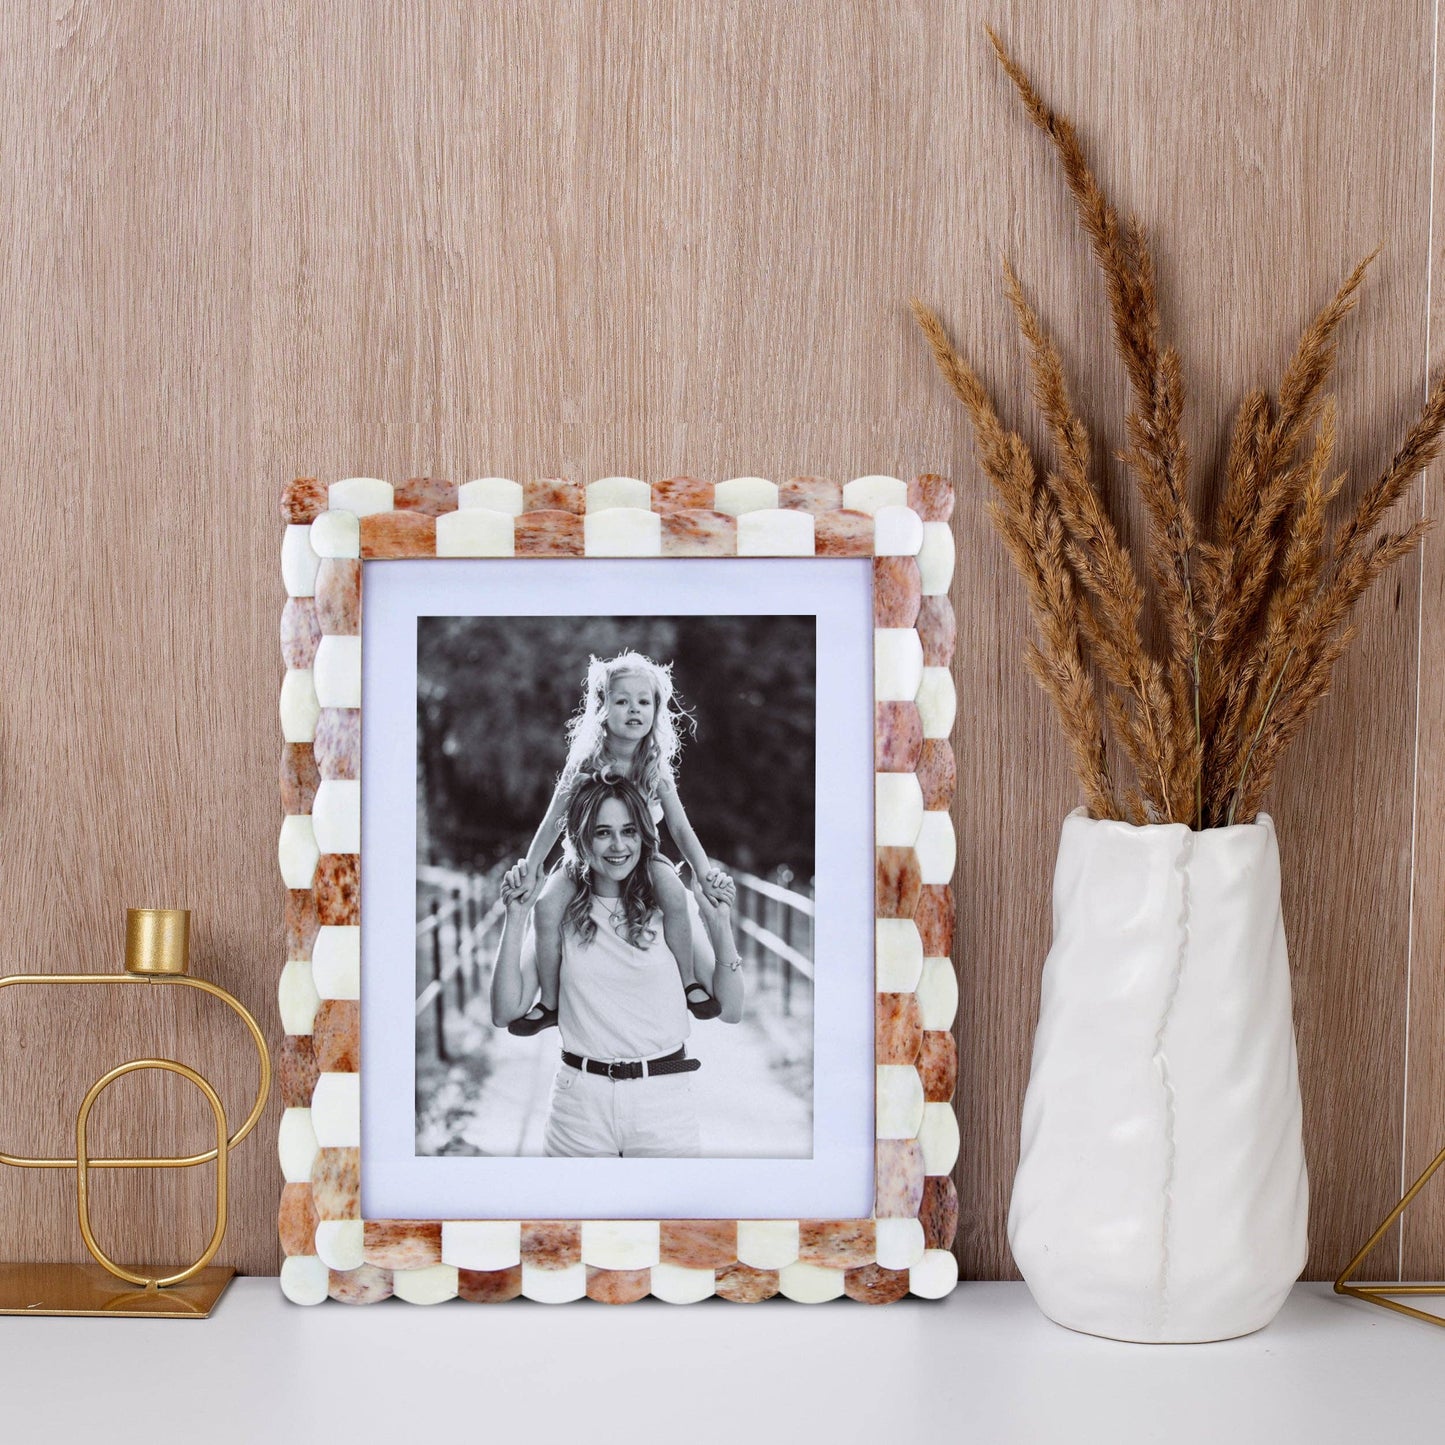 Scalloped Brown & White Picture Frame (8x10)